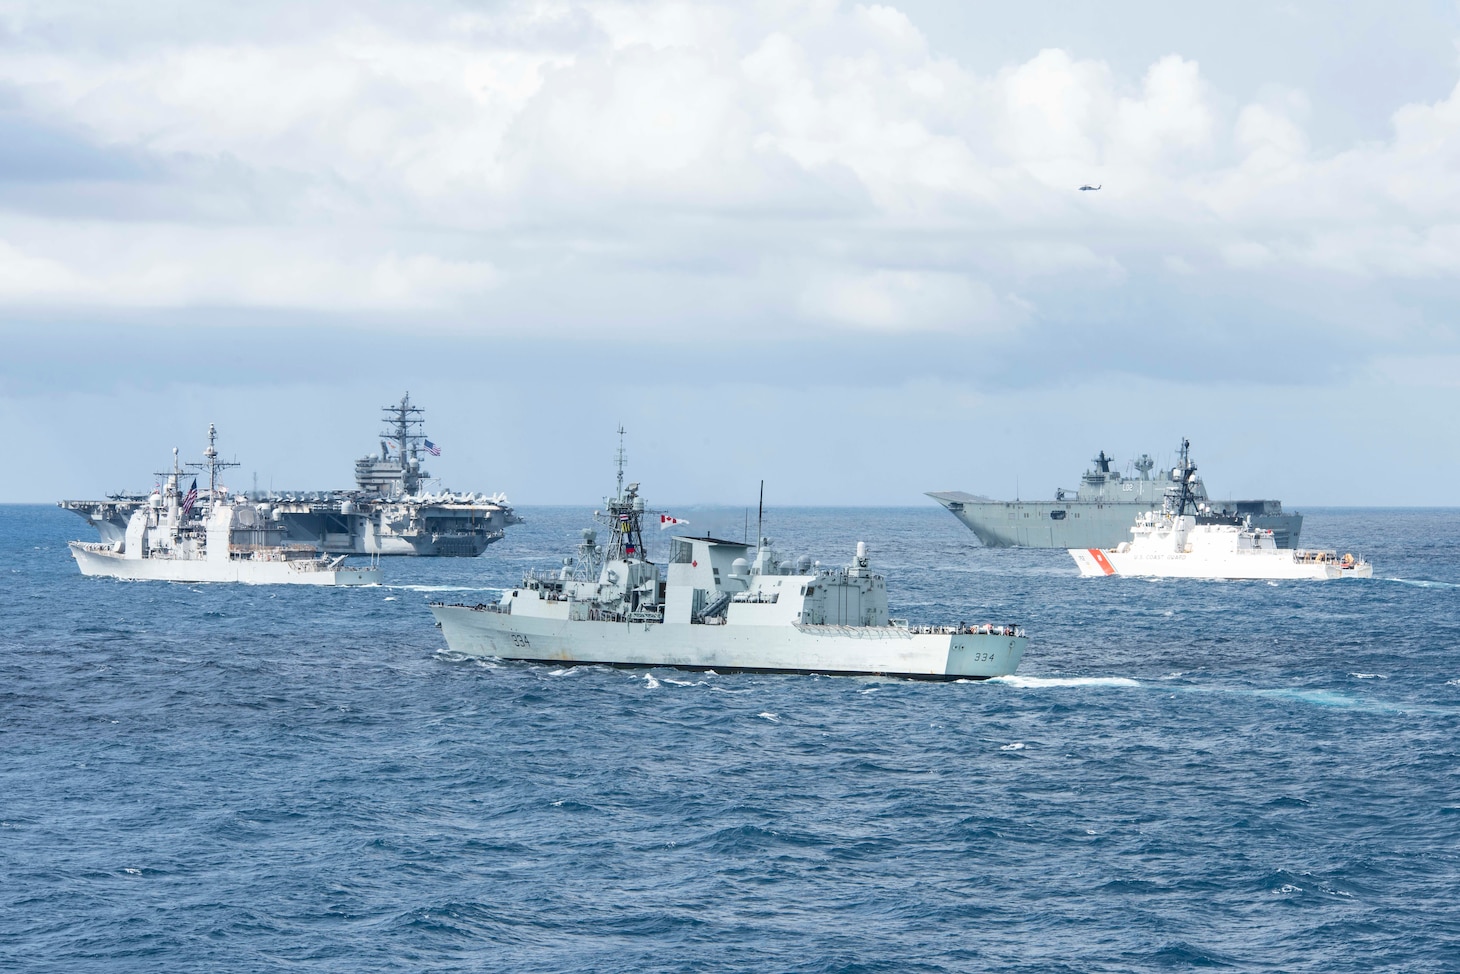 190711-N-DX072-1052 TASMAN SEA (July 11, 2019) The U.S. Navy Nimitz-class aircraft carrier USS Ronald Reagan (CVN 76), top left, the U.S. Navy Ticonderoga-class guided-missile cruiser USS Chancellorsville (CG 62), left, the Royal Canadian Navy Halifax-class frigate HMCS Regina (FFH 334), center, the Royal Australian Navy Canberra-class landing helicopter dock ship HMAS Canberra (L02), top right, and the Legend-class cutter USCGC Stratton (WMSL 752), right, transit by the amphibious transport dock ship USS Green Bay (LPD 20) in a photo exercise (PHOTOEX) during Talisman Sabre 2019. Green Bay, part of the Wasp Expeditionary Strike Group, with embarked 31st Marine Expeditionary Unit, is currently participating in Talisman Sabre 2019 off the coast of Northern Australia. A bilateral, biennial event, Talisman Sabre is designed to improve U.S. and Australian combat training, readiness and interoperability through realistic, relevant training necessary to maintain regional security, peace and stability.